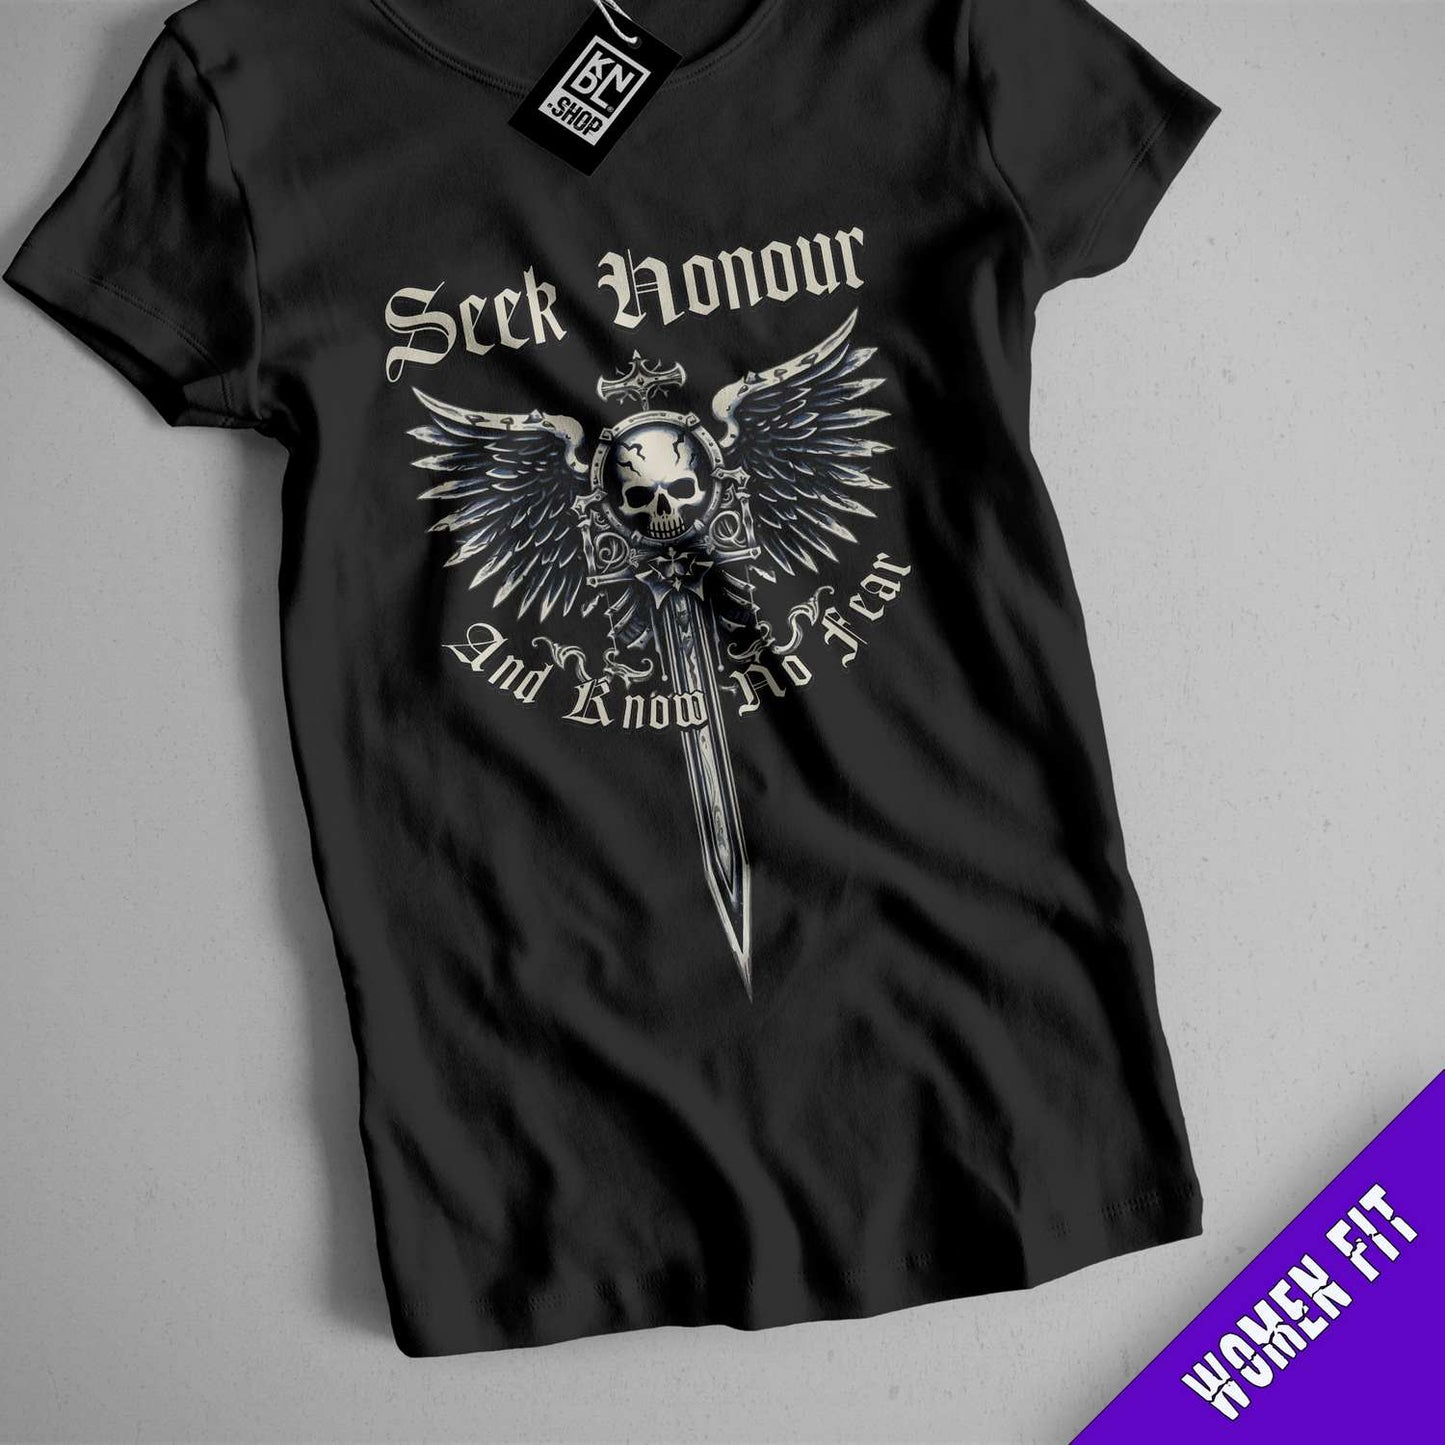 a black shirt with a skull and sword on it